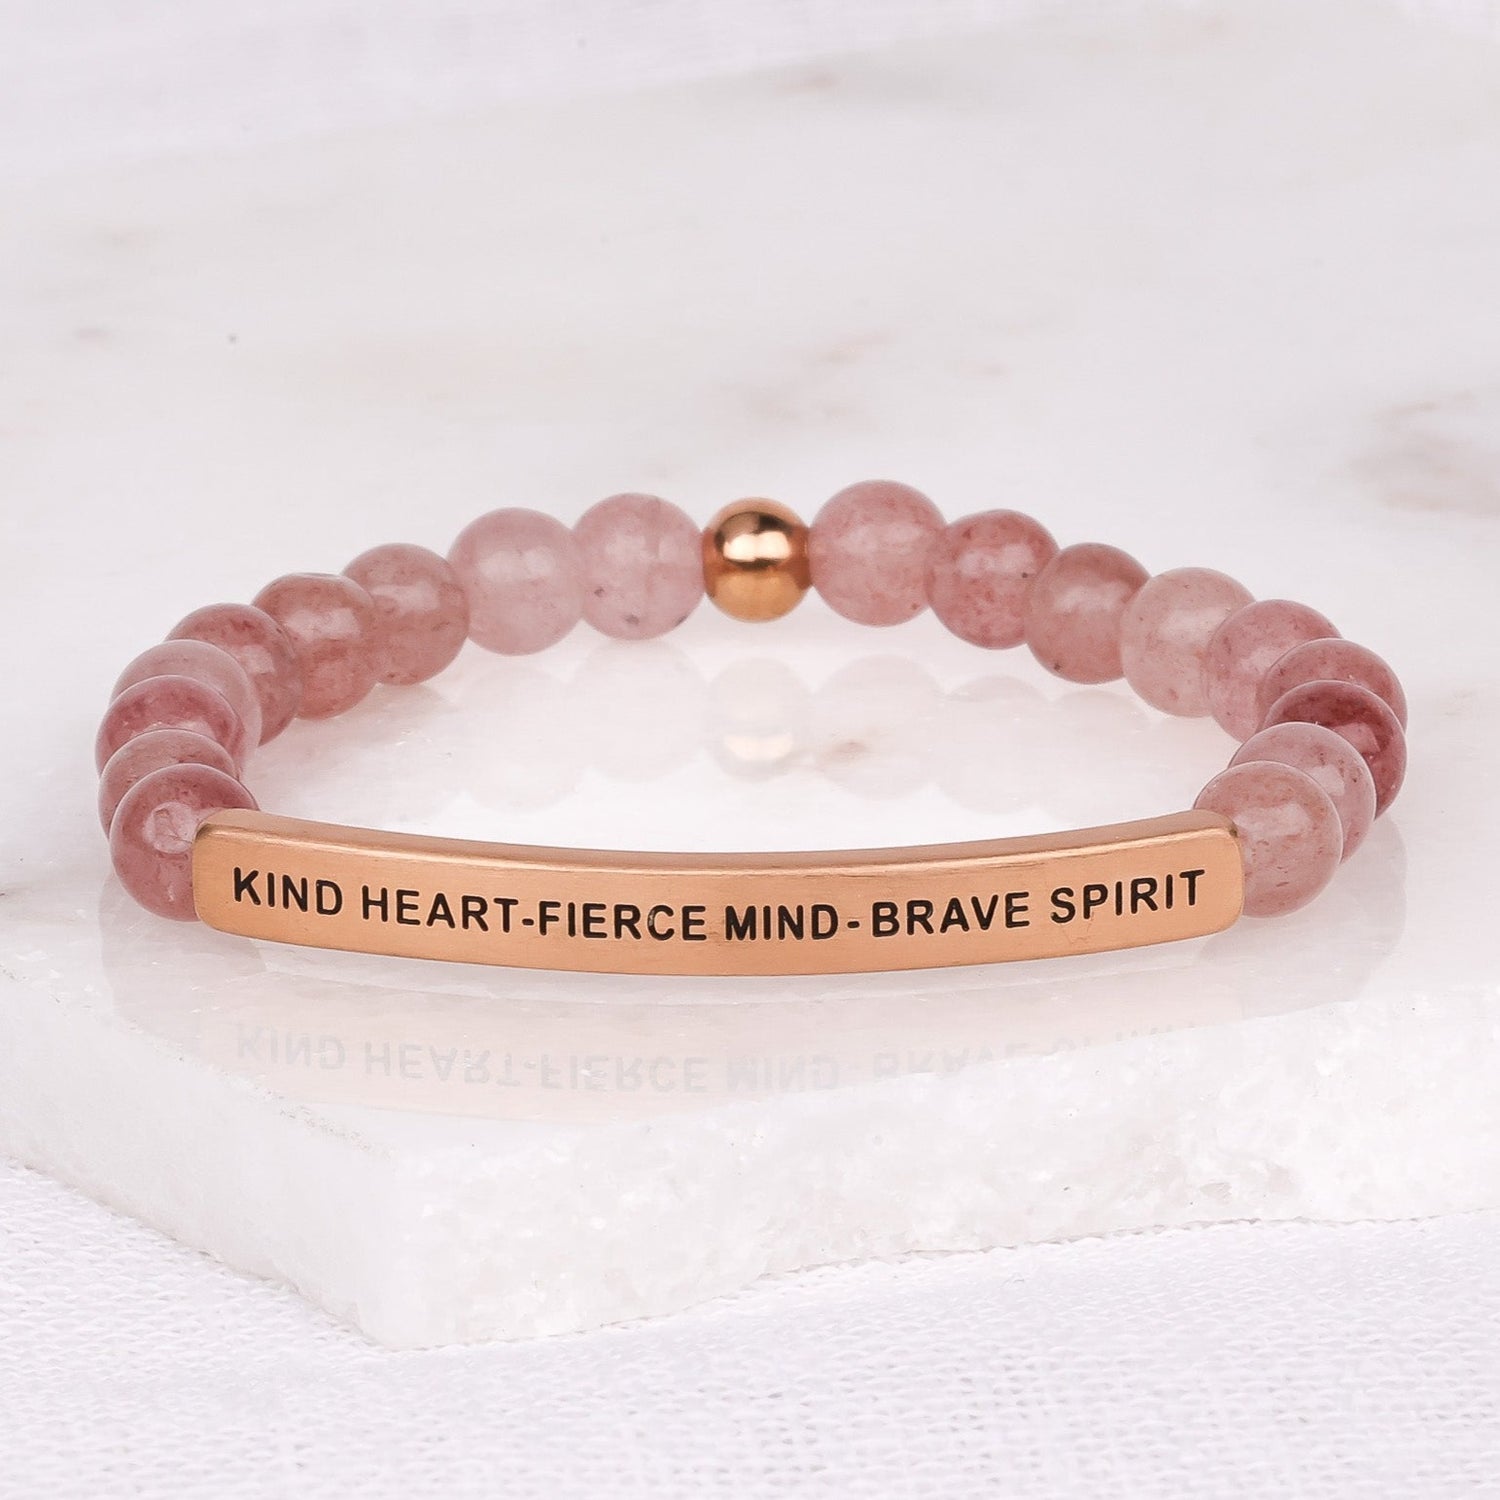 Kind Heart Fierce Mind Brave Spirit - Products - SWAK Embroidery